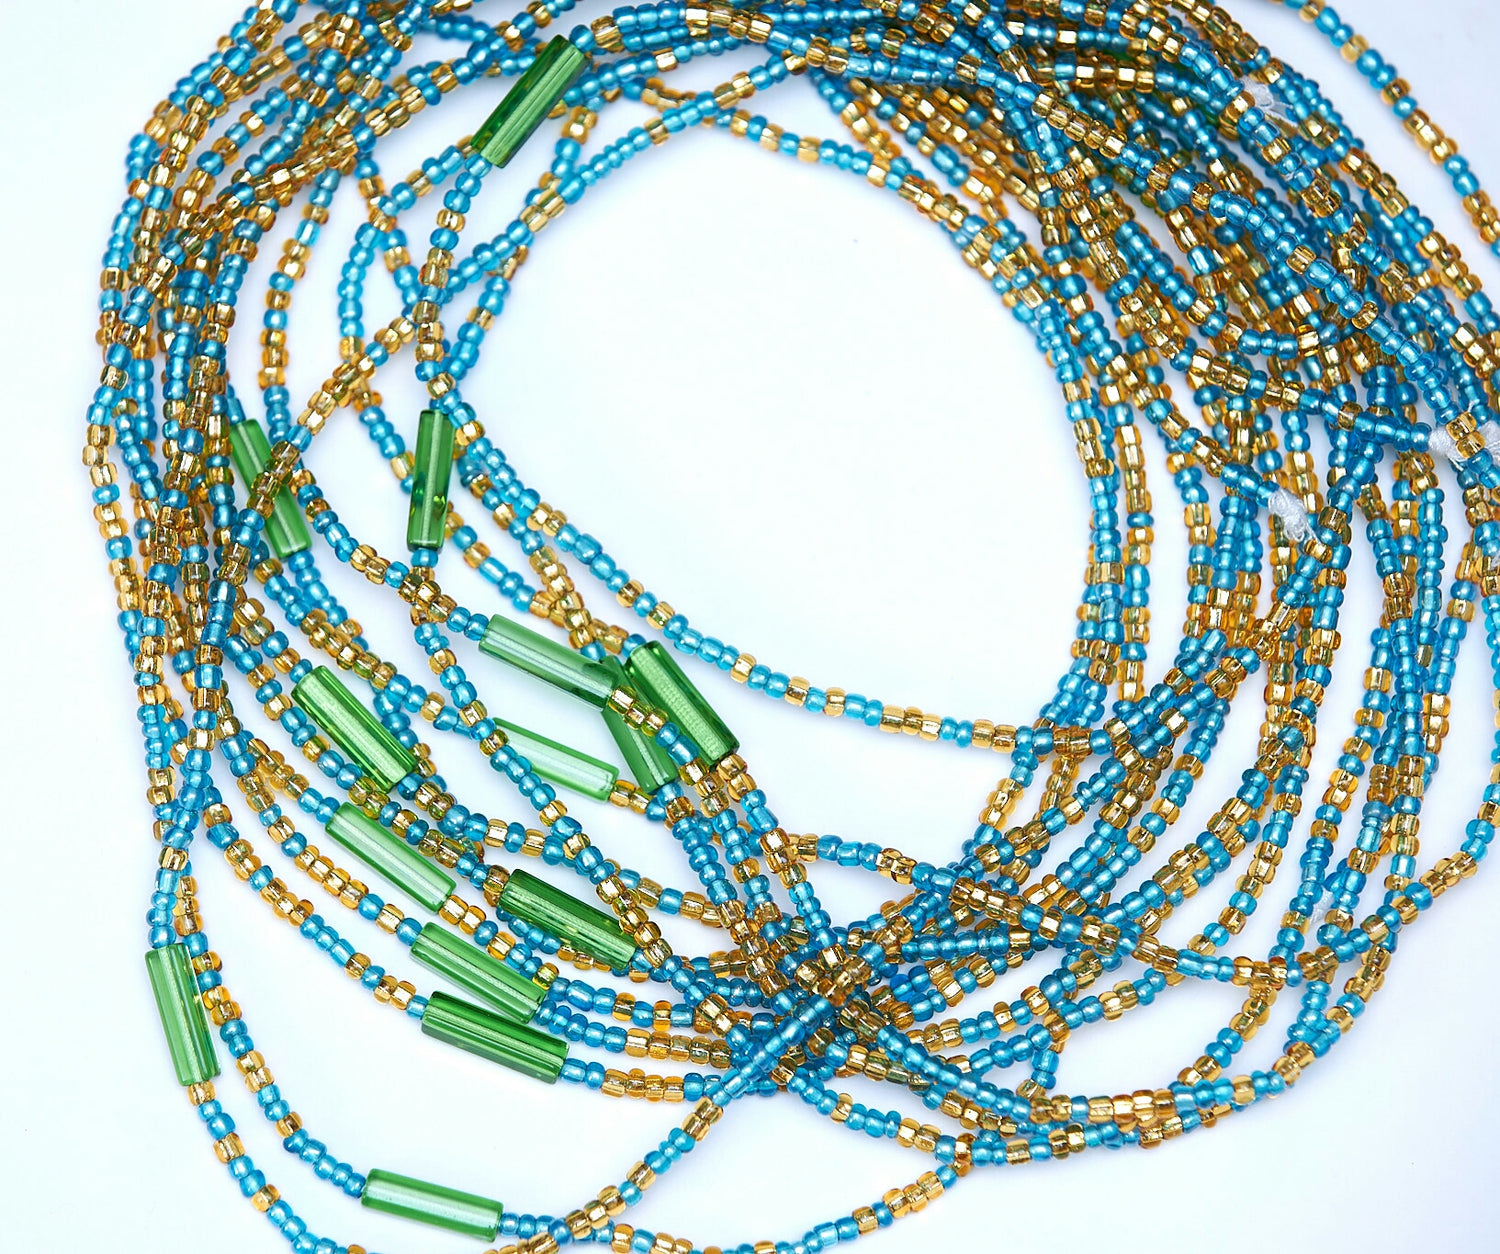 45 Inches Gold And Sea Blue Glass Beads With Green Pebble Bar Tie On Waist Beads